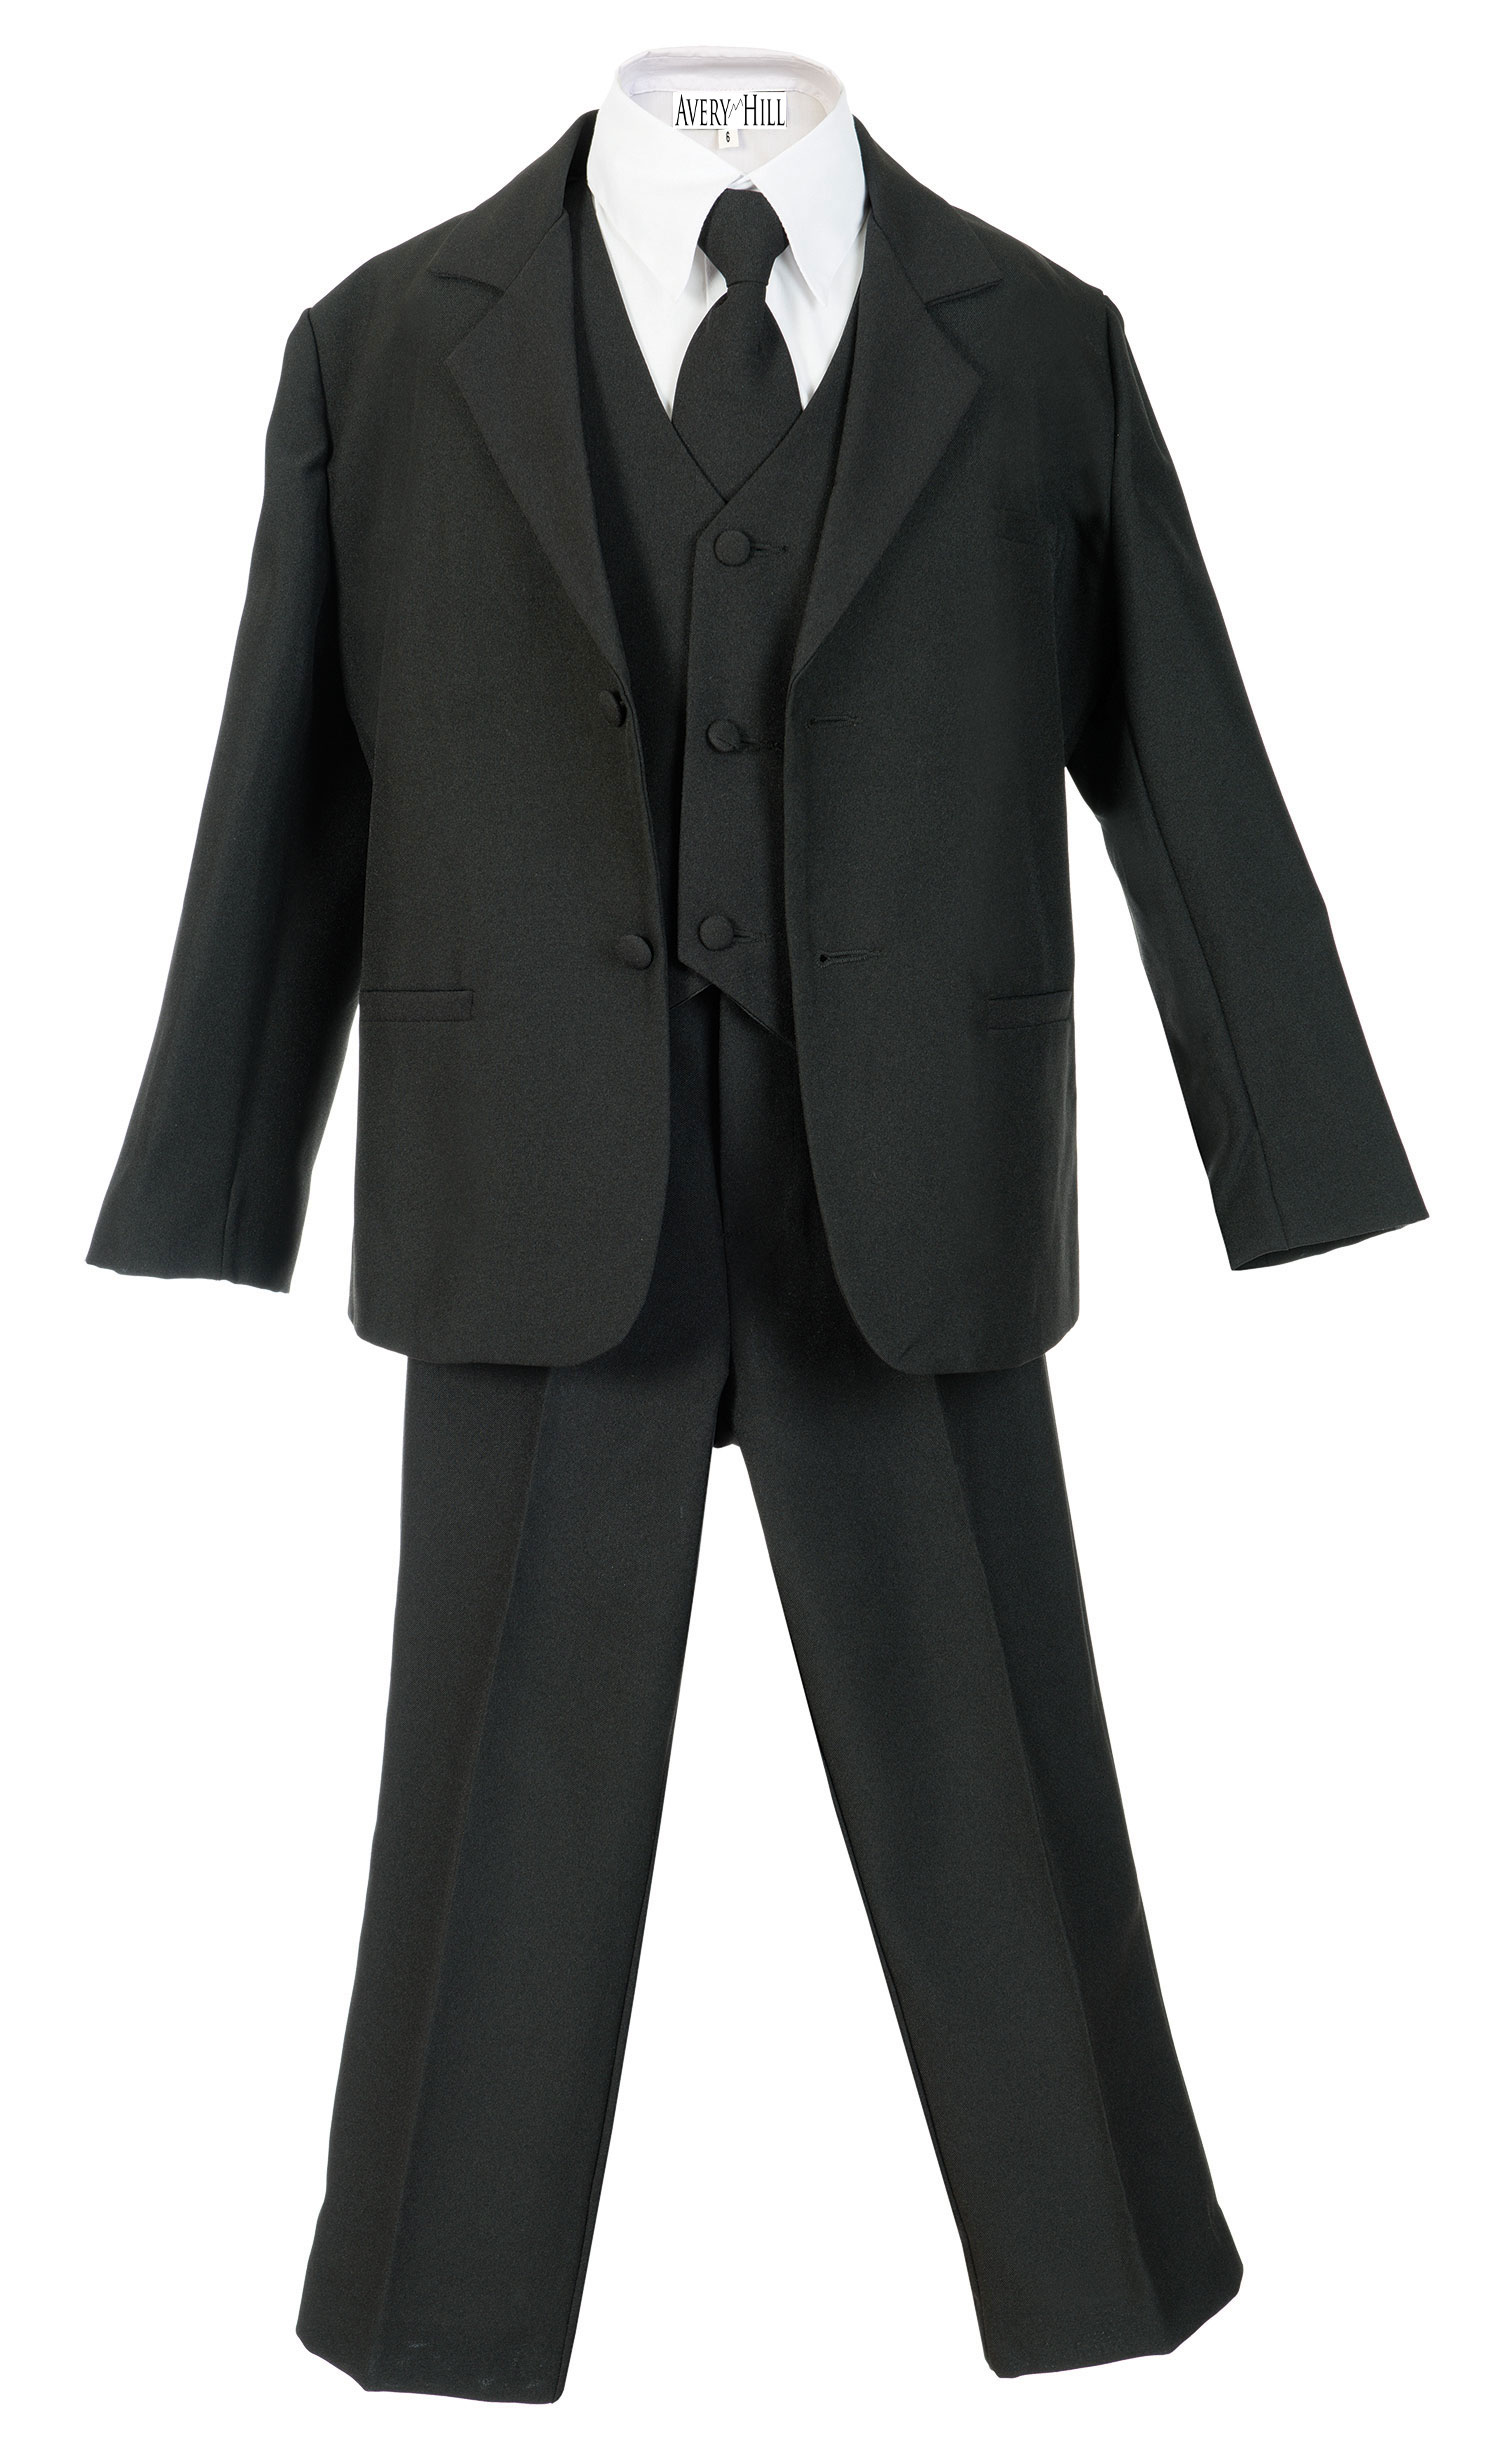 Avery Hill Boys Formal 5 Piece Suit with Shirt and Vest Black - 12